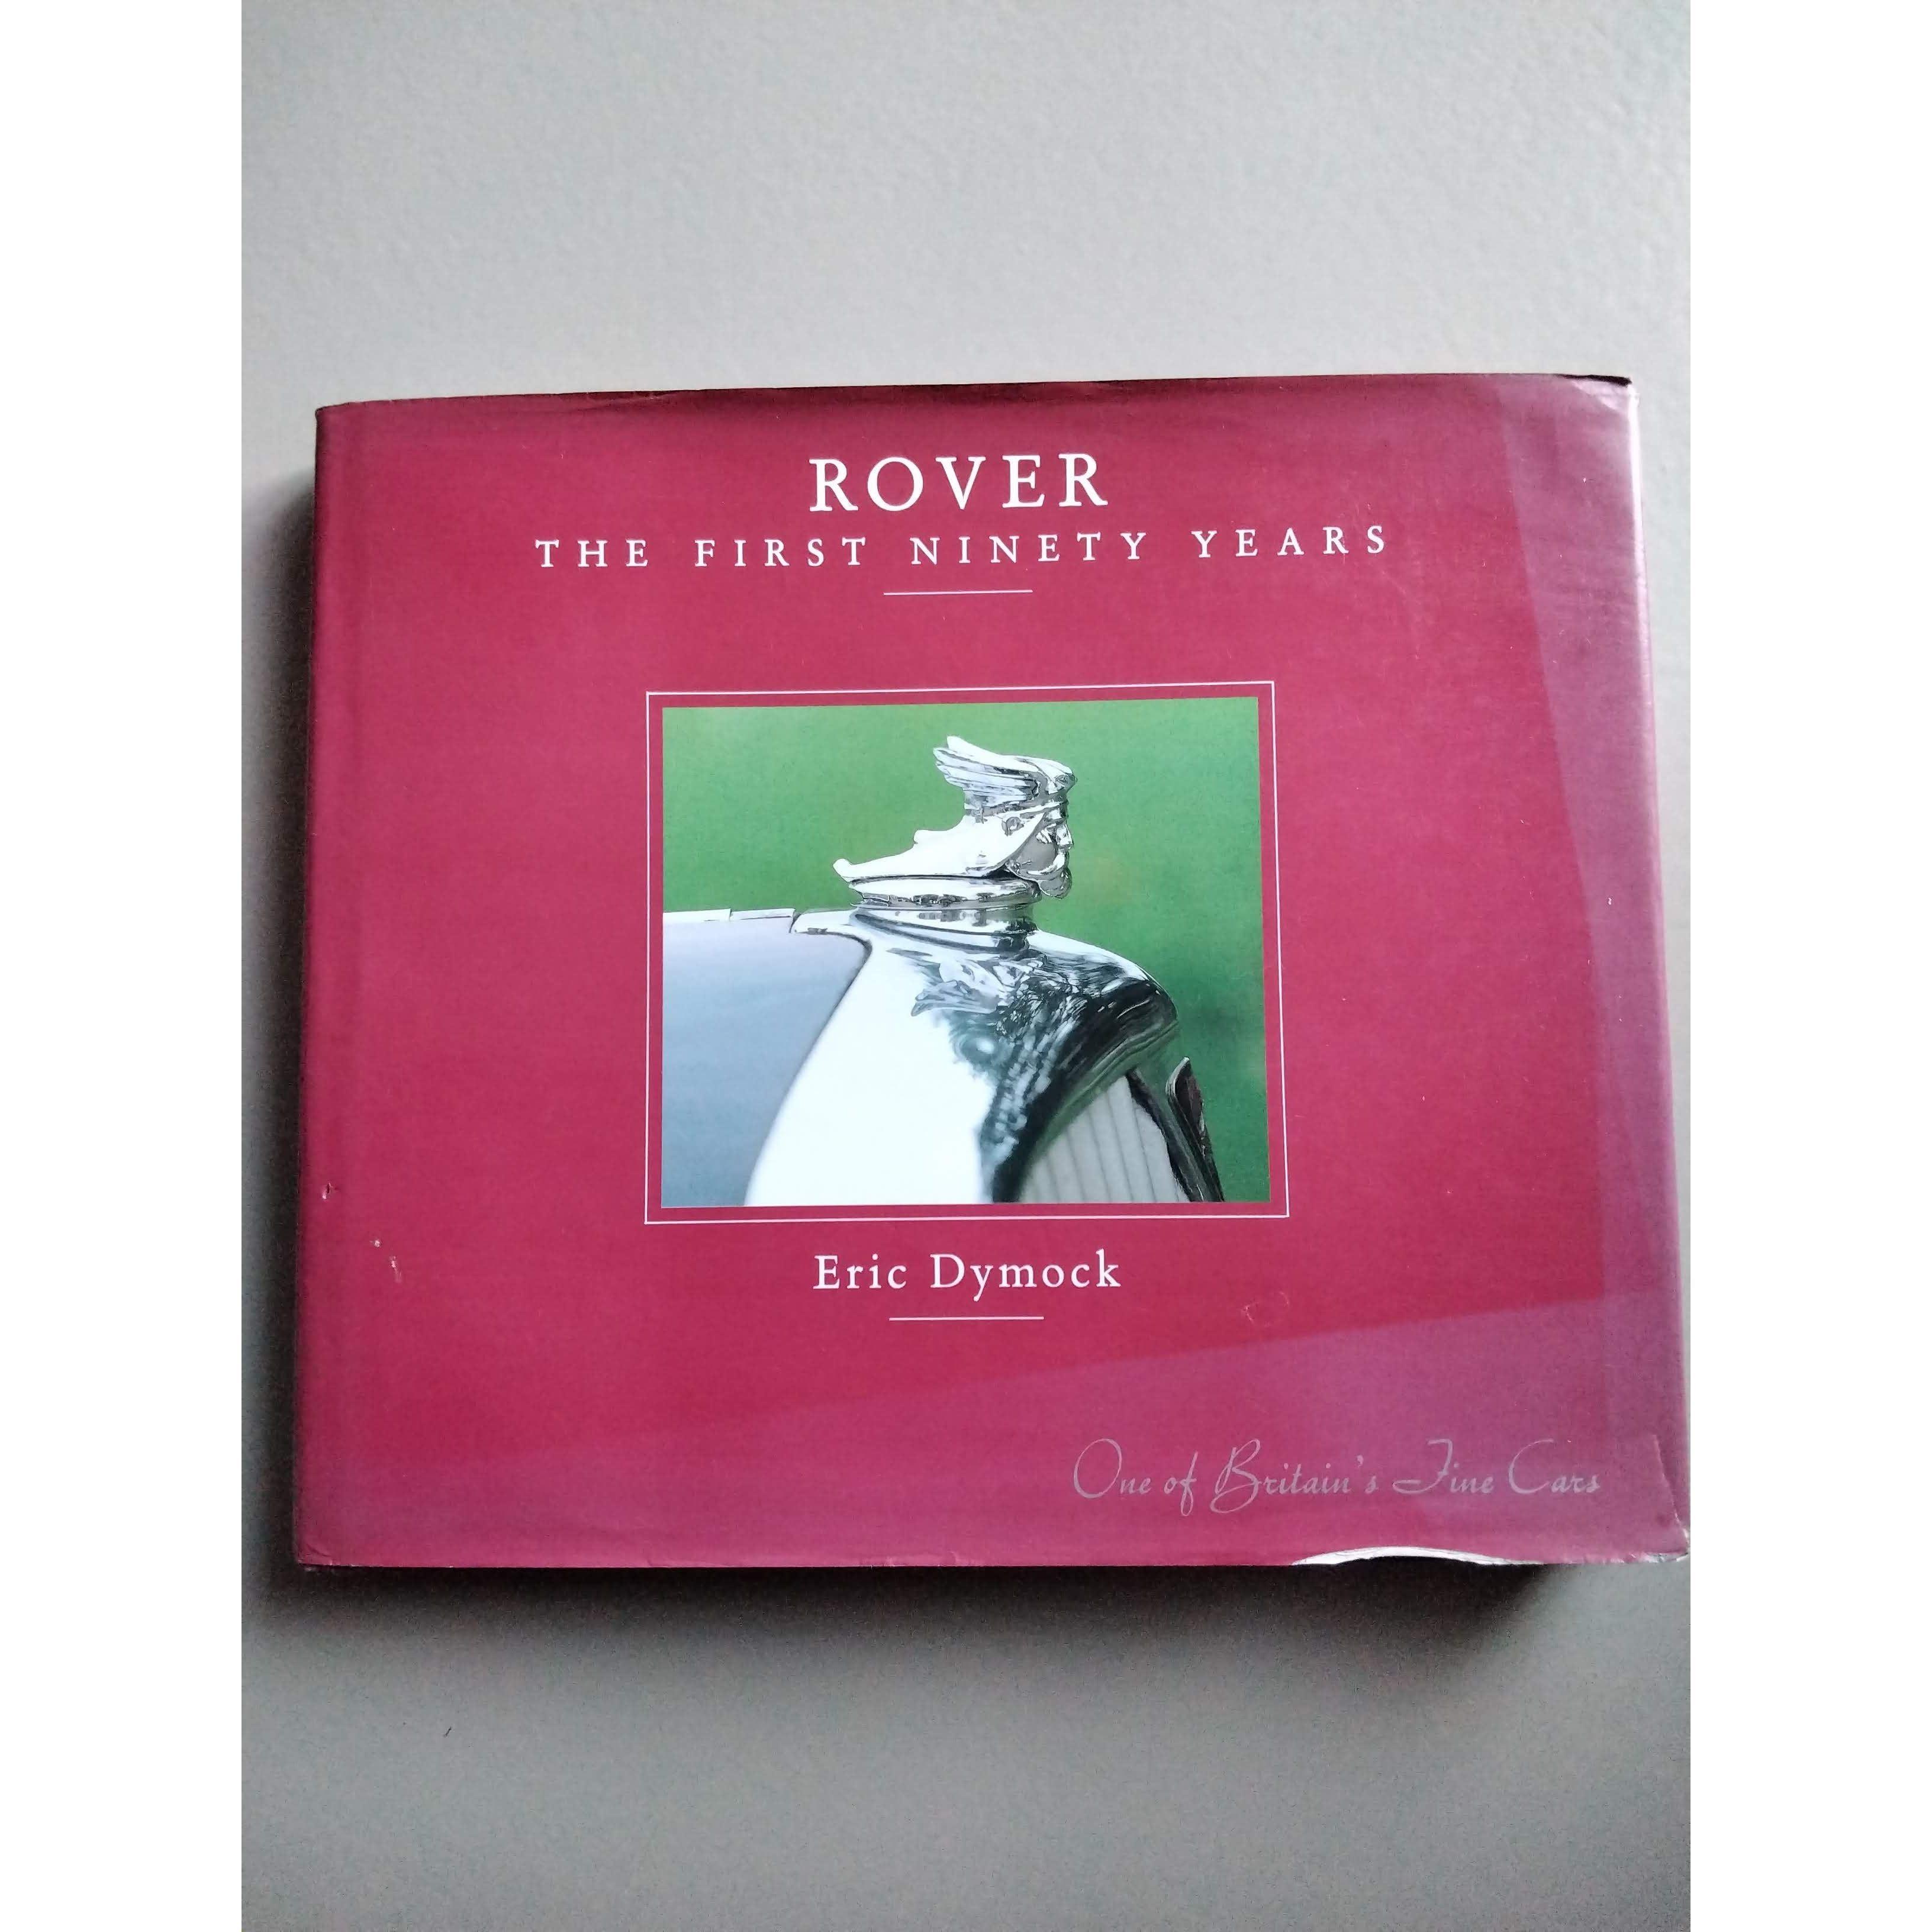 Rover The First 90 Years by Eric Dymock - Berry Smink British Car Parts